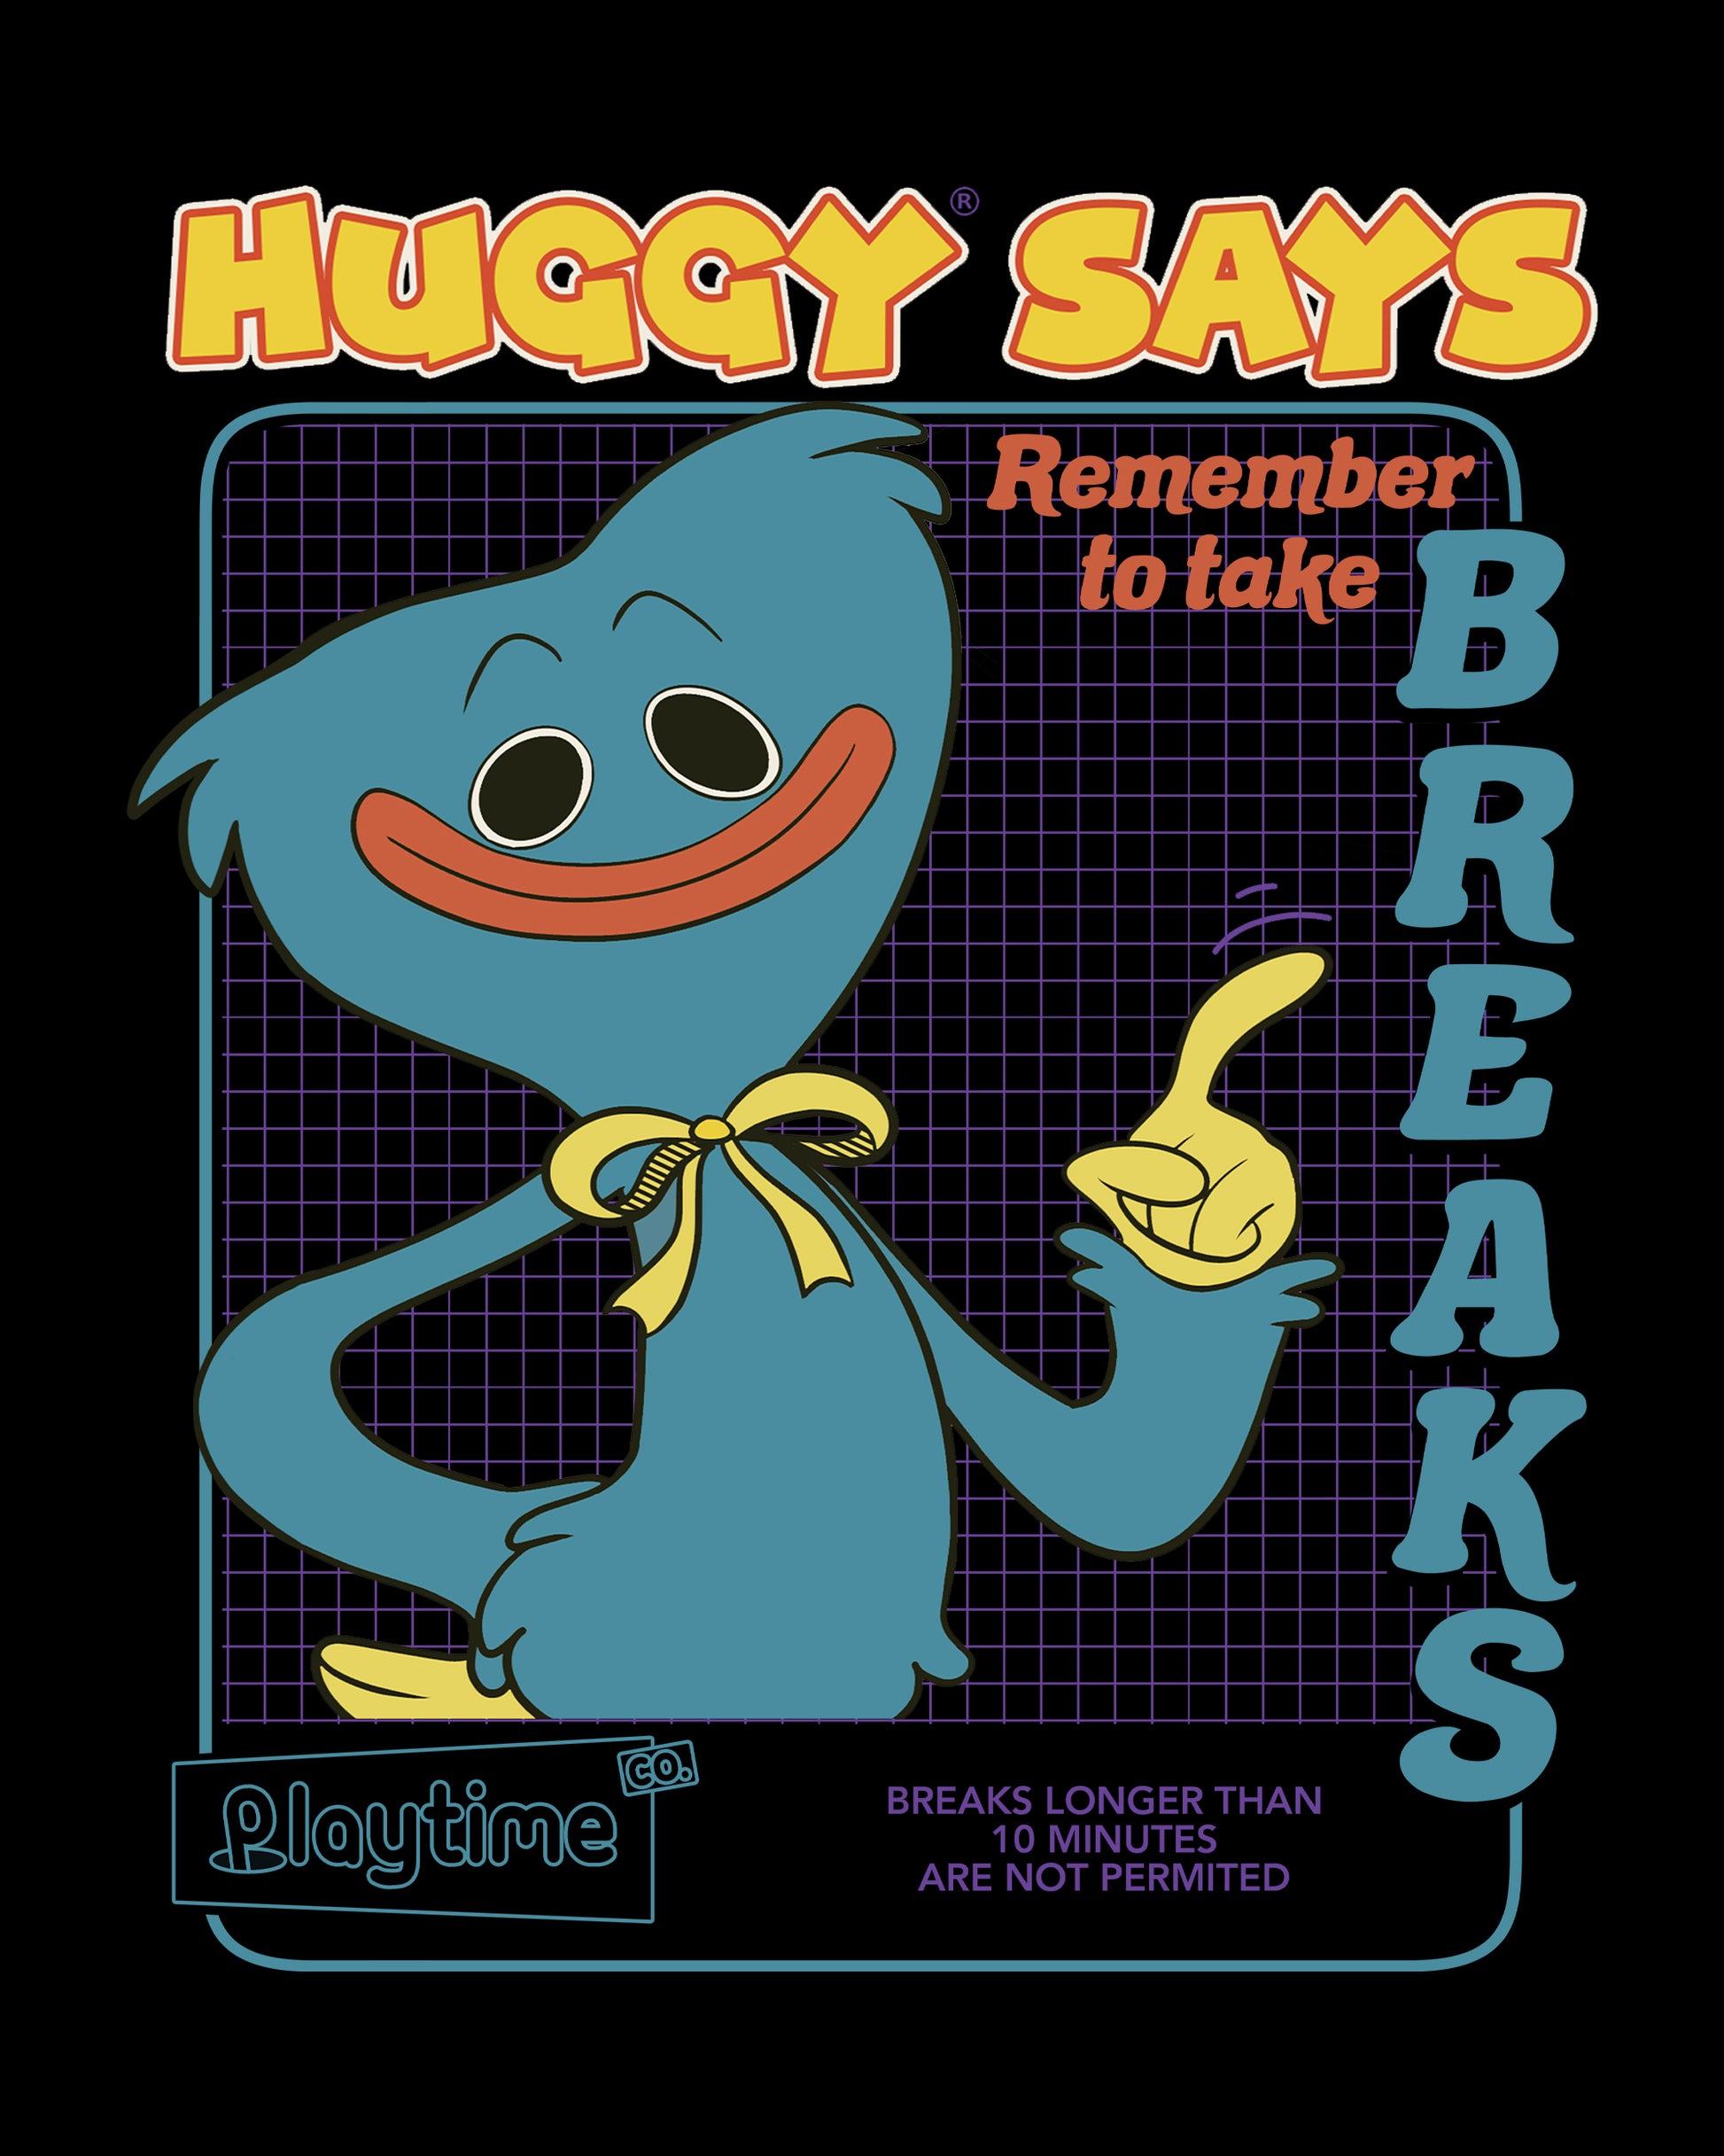 image on shirt: huggy wuggy smiling holding finger up with checkered background. text: huggy says remember to take breaks breaks longer than 10 minutes are not permited playtime co.